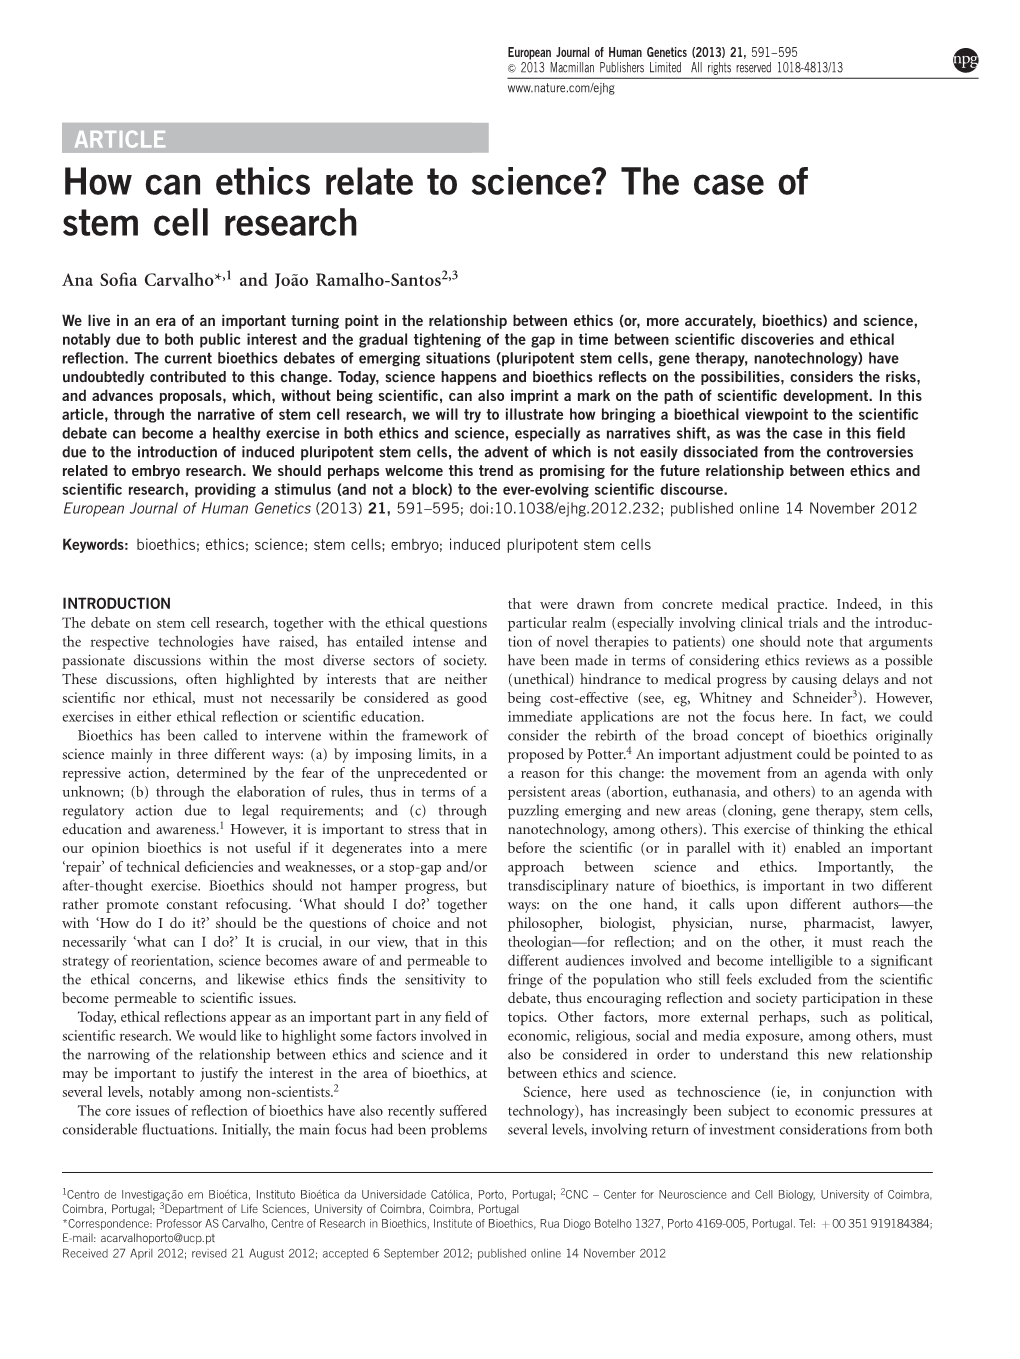 How Can Ethics Relate to Science? the Case of Stem Cell Research